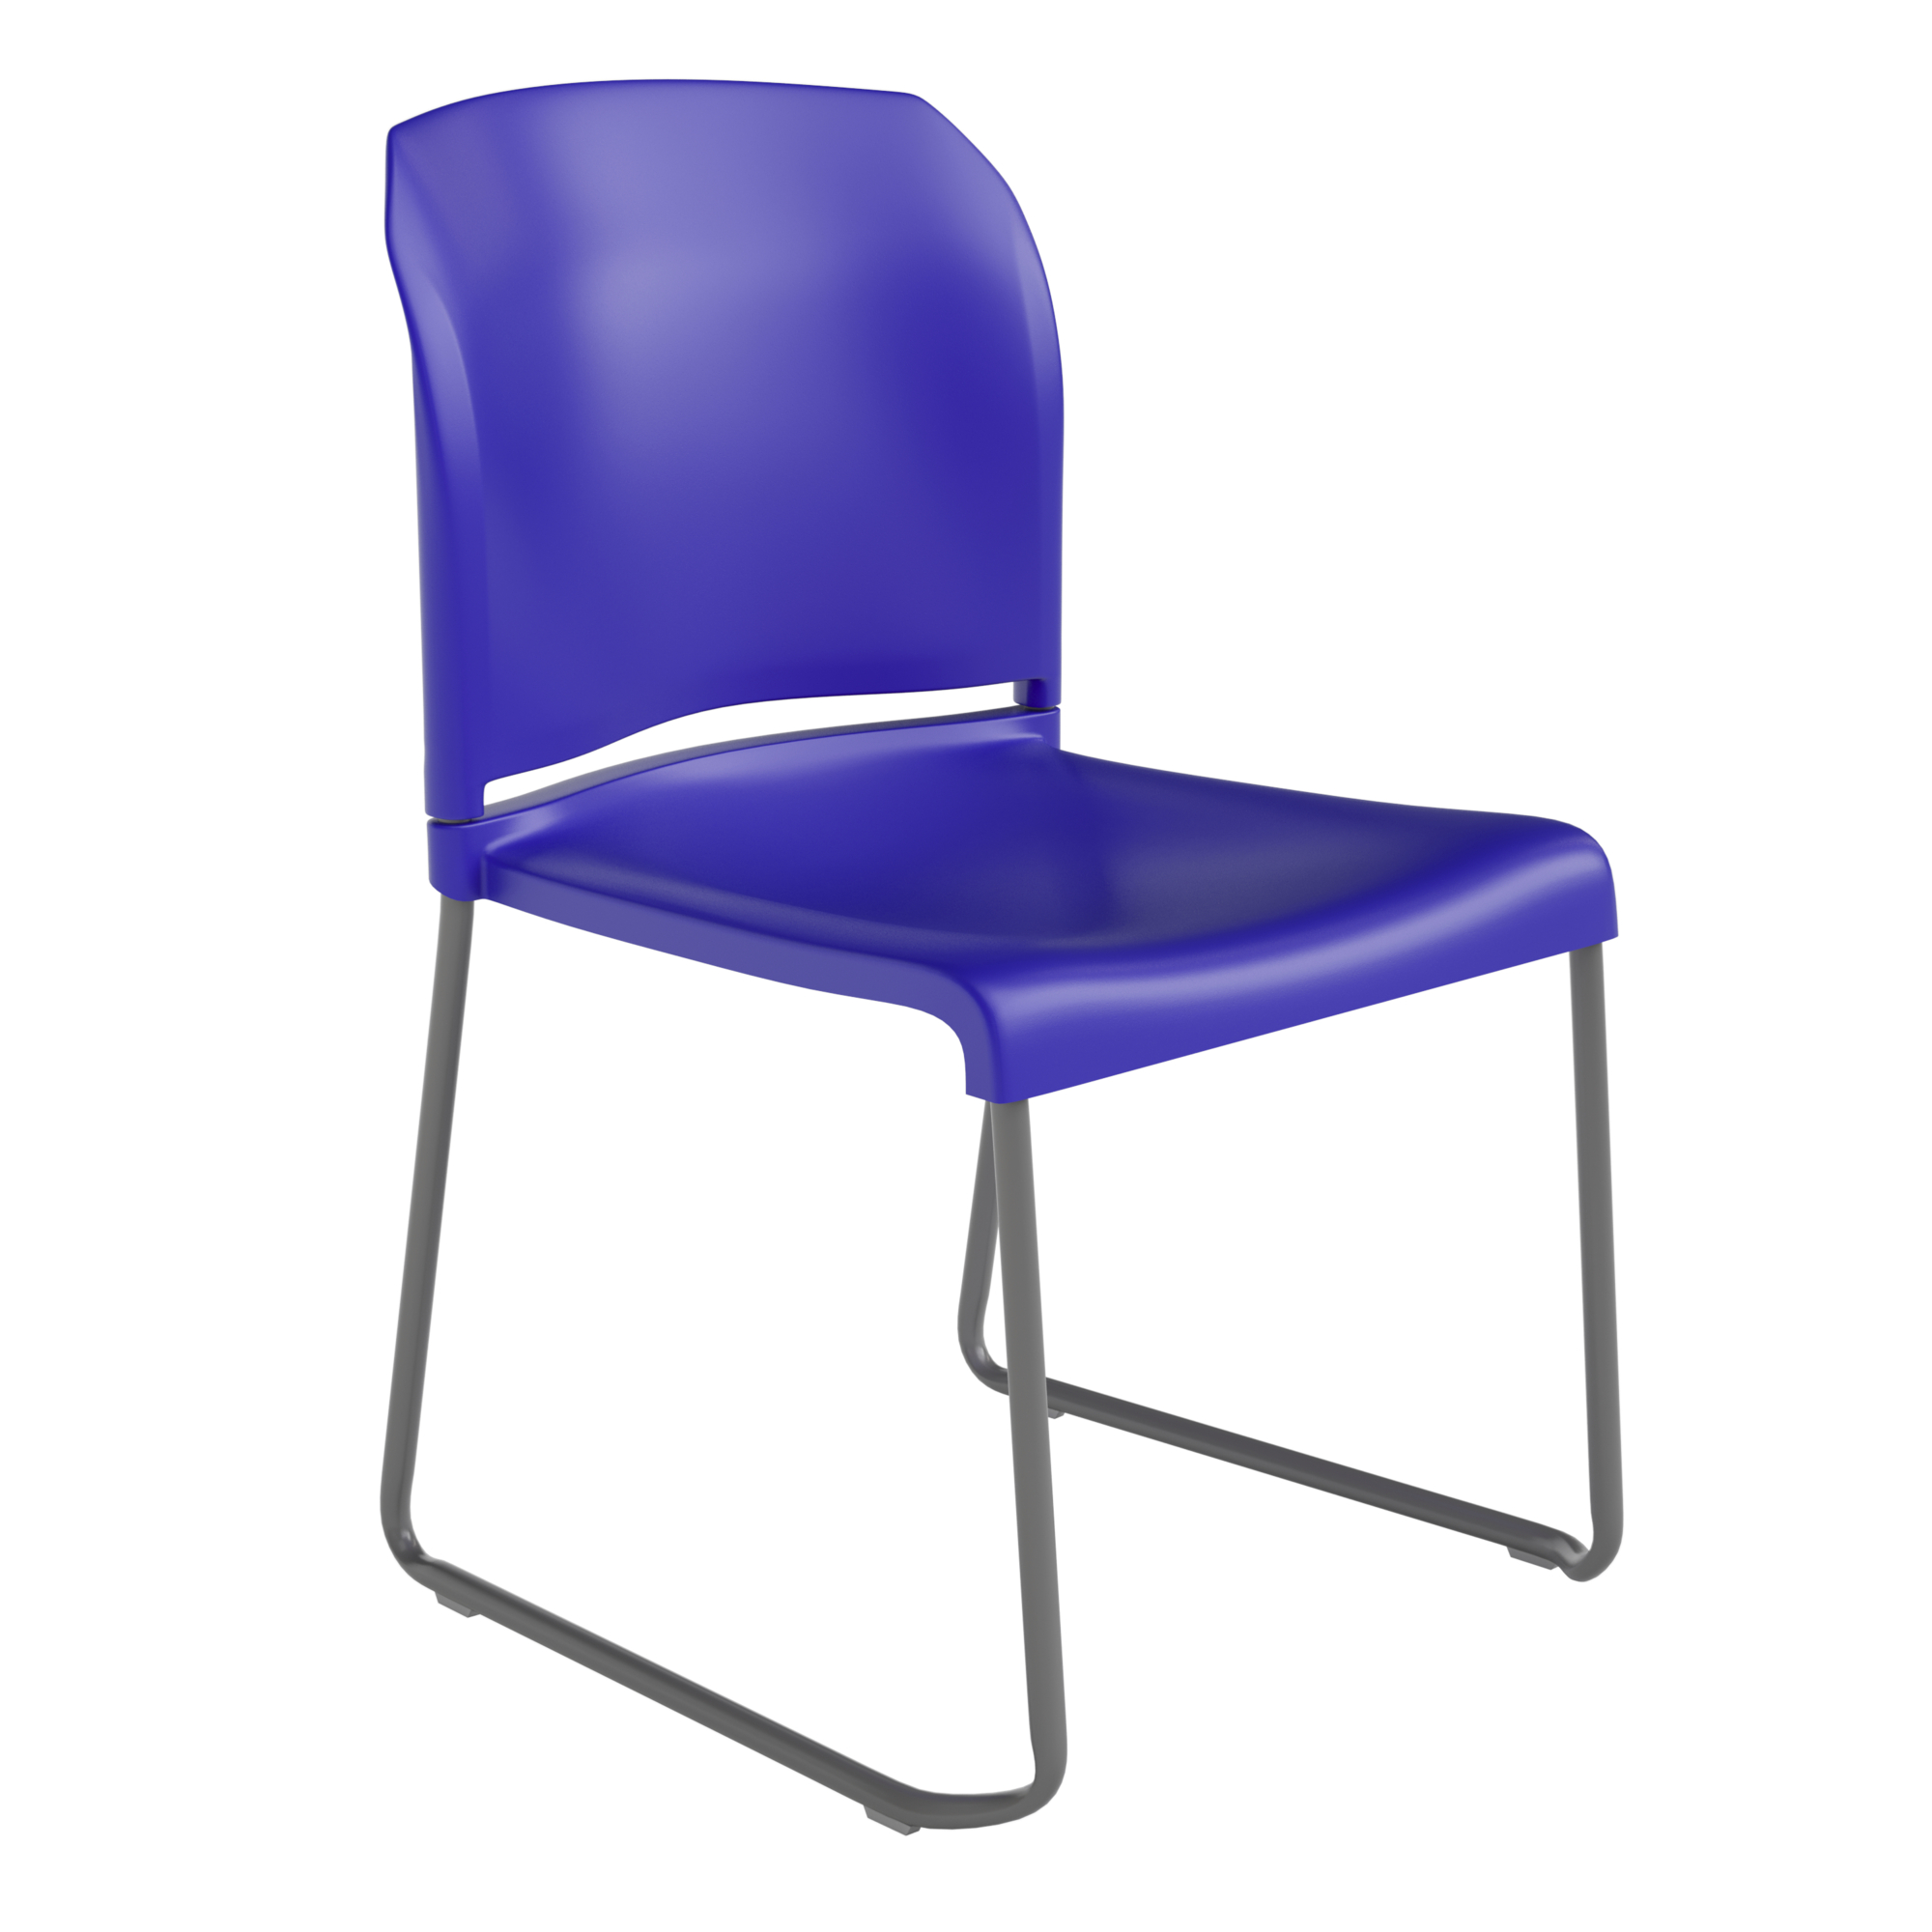 Flash Furniture, 880 lb. Capacity Blue Full Back Stack Chair, Primary Color Blue, Included (qty.) 1, Model RUT238ABL